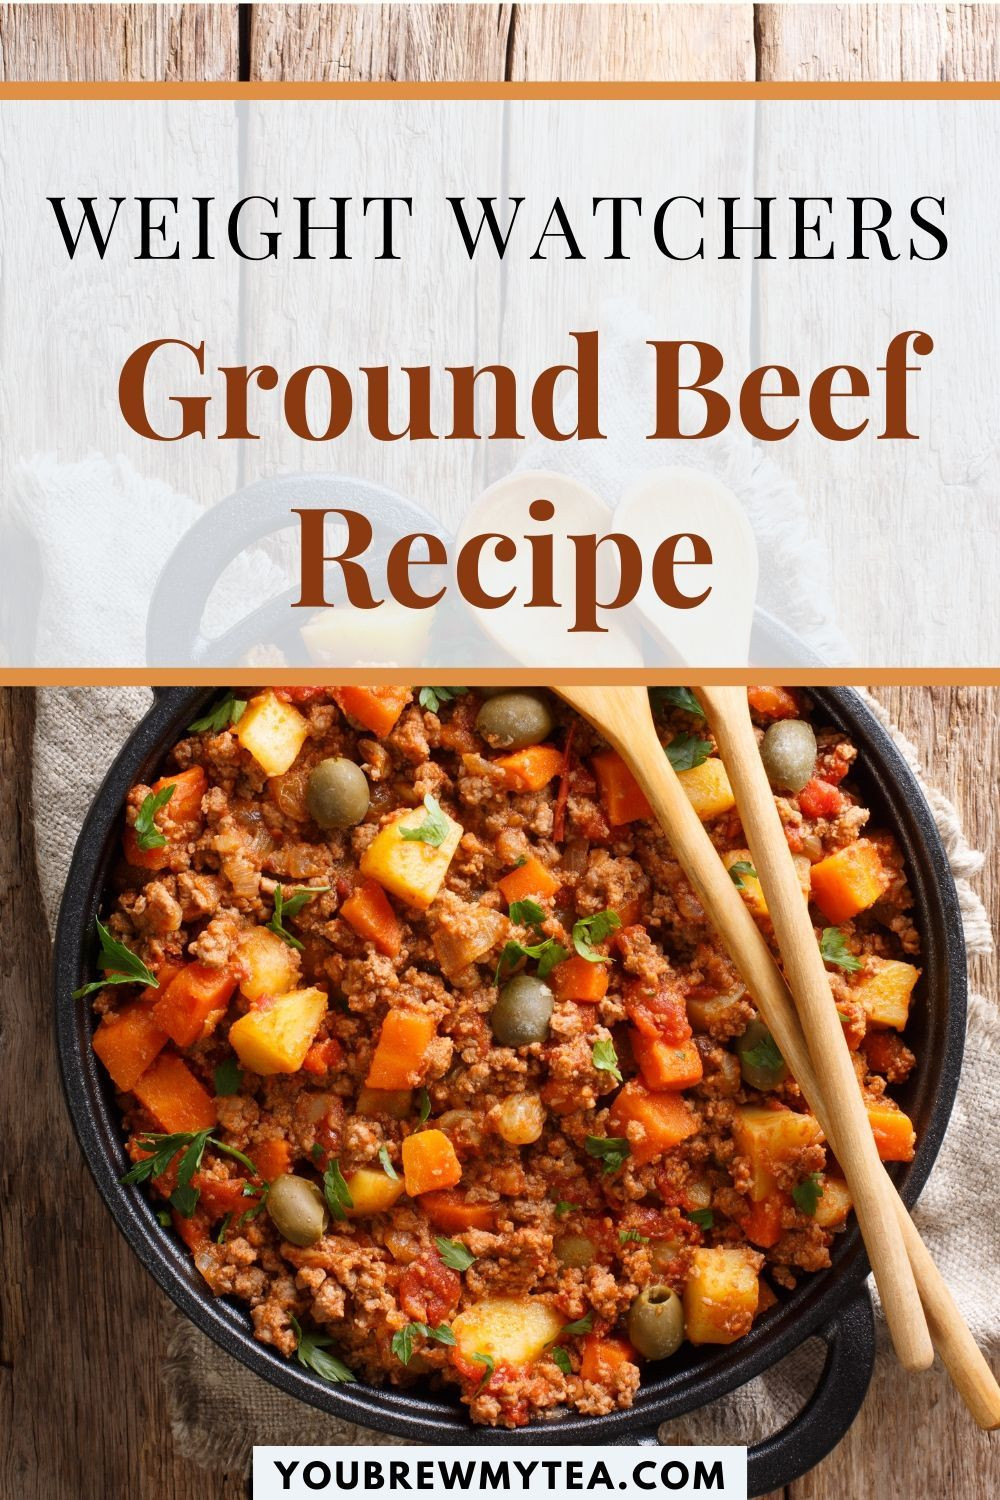 Weight Watchers Recipes With Ground Beef
 Weight Watcher Ground Beef Recipe in 2020